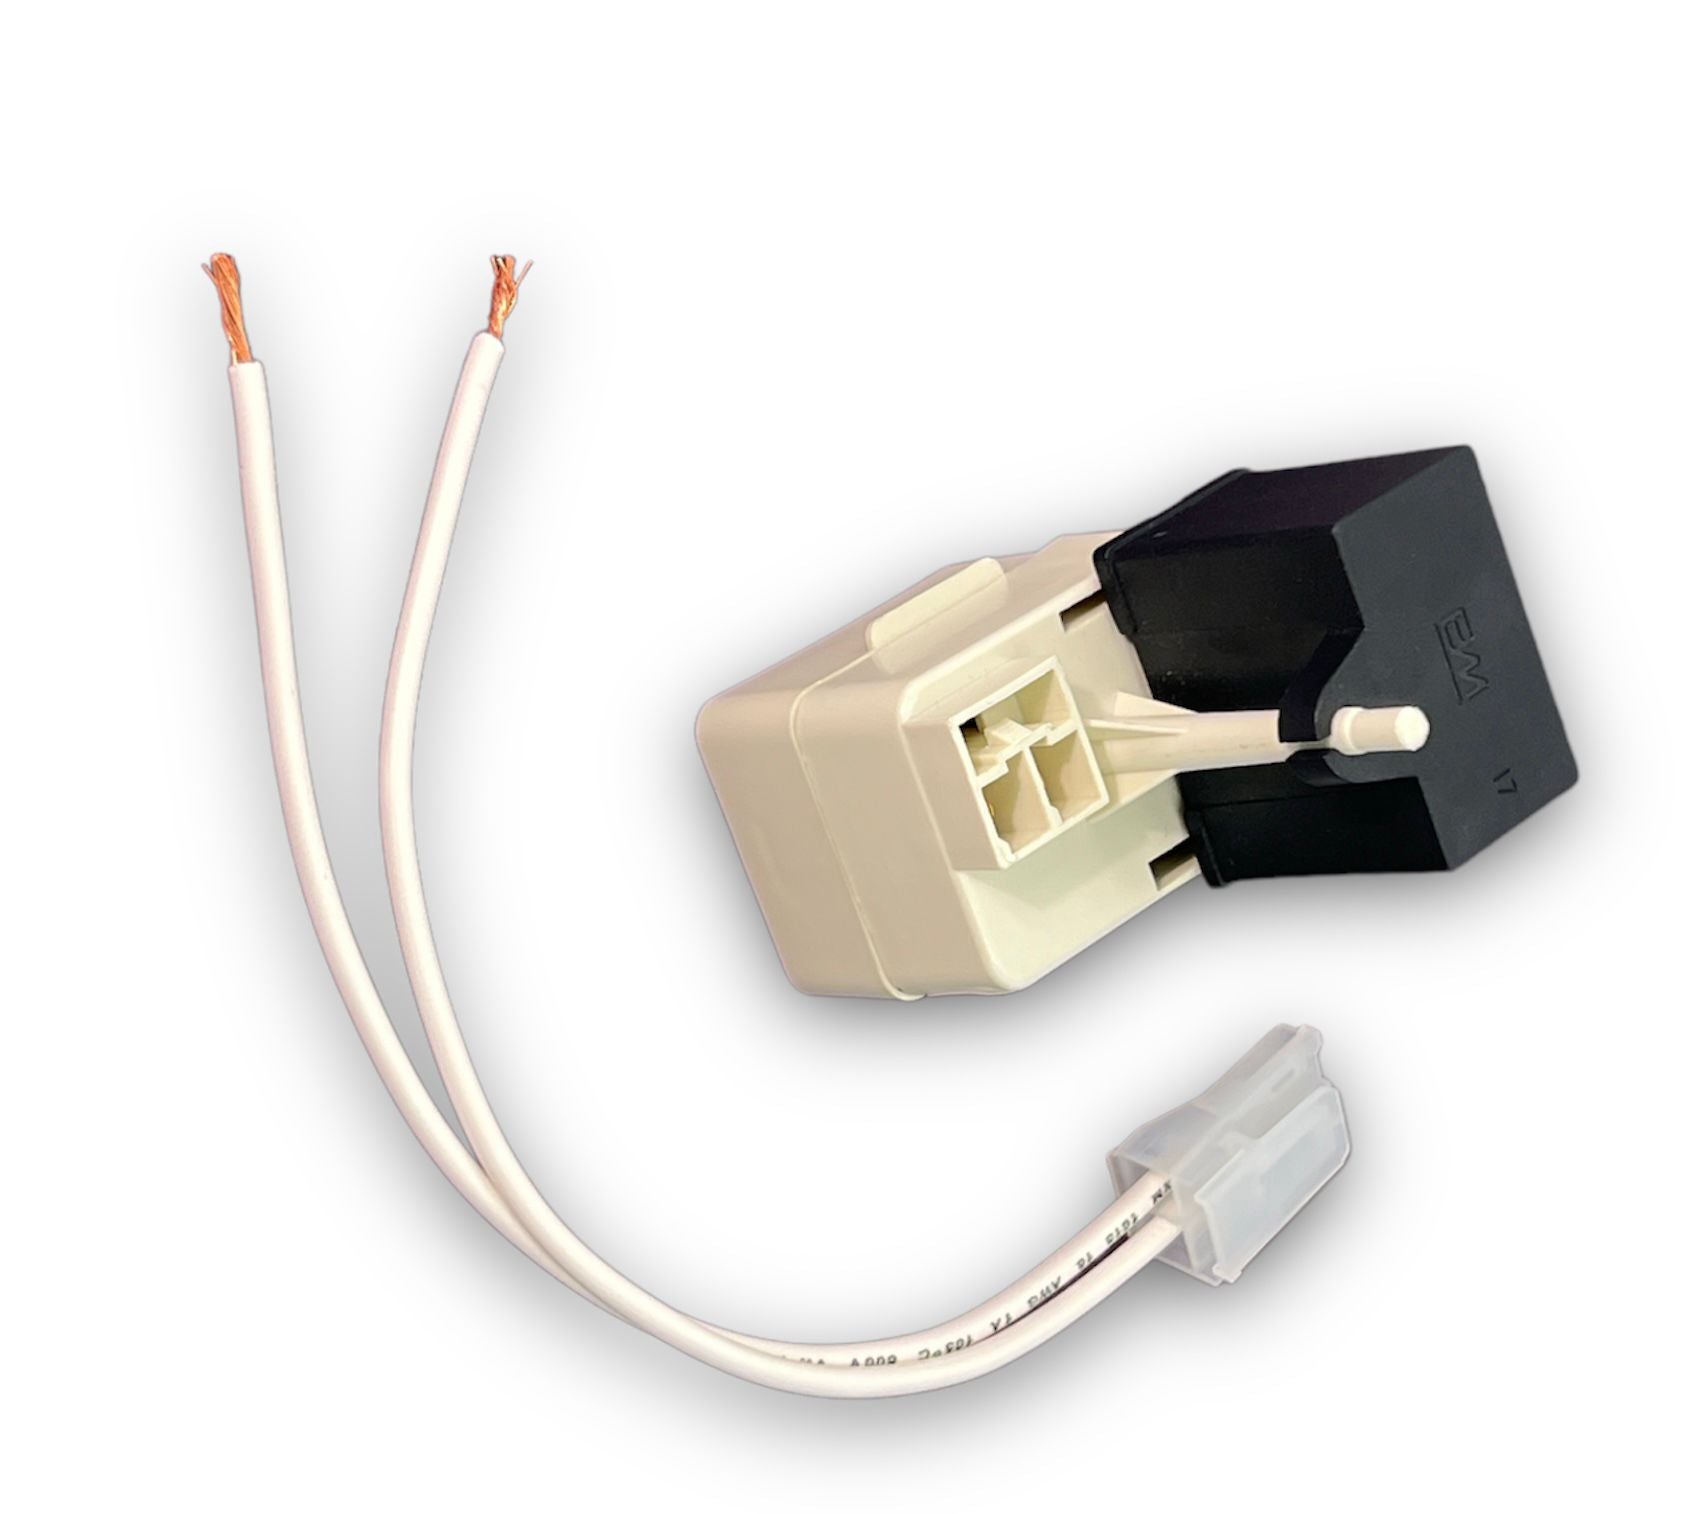 Electrolux Refrigerator Start Device Kit - 297259523 or 297286802, REPLACES: 4451779 AP6031137 PS11765932 EAP11765932 PD00062090 INVERTEC